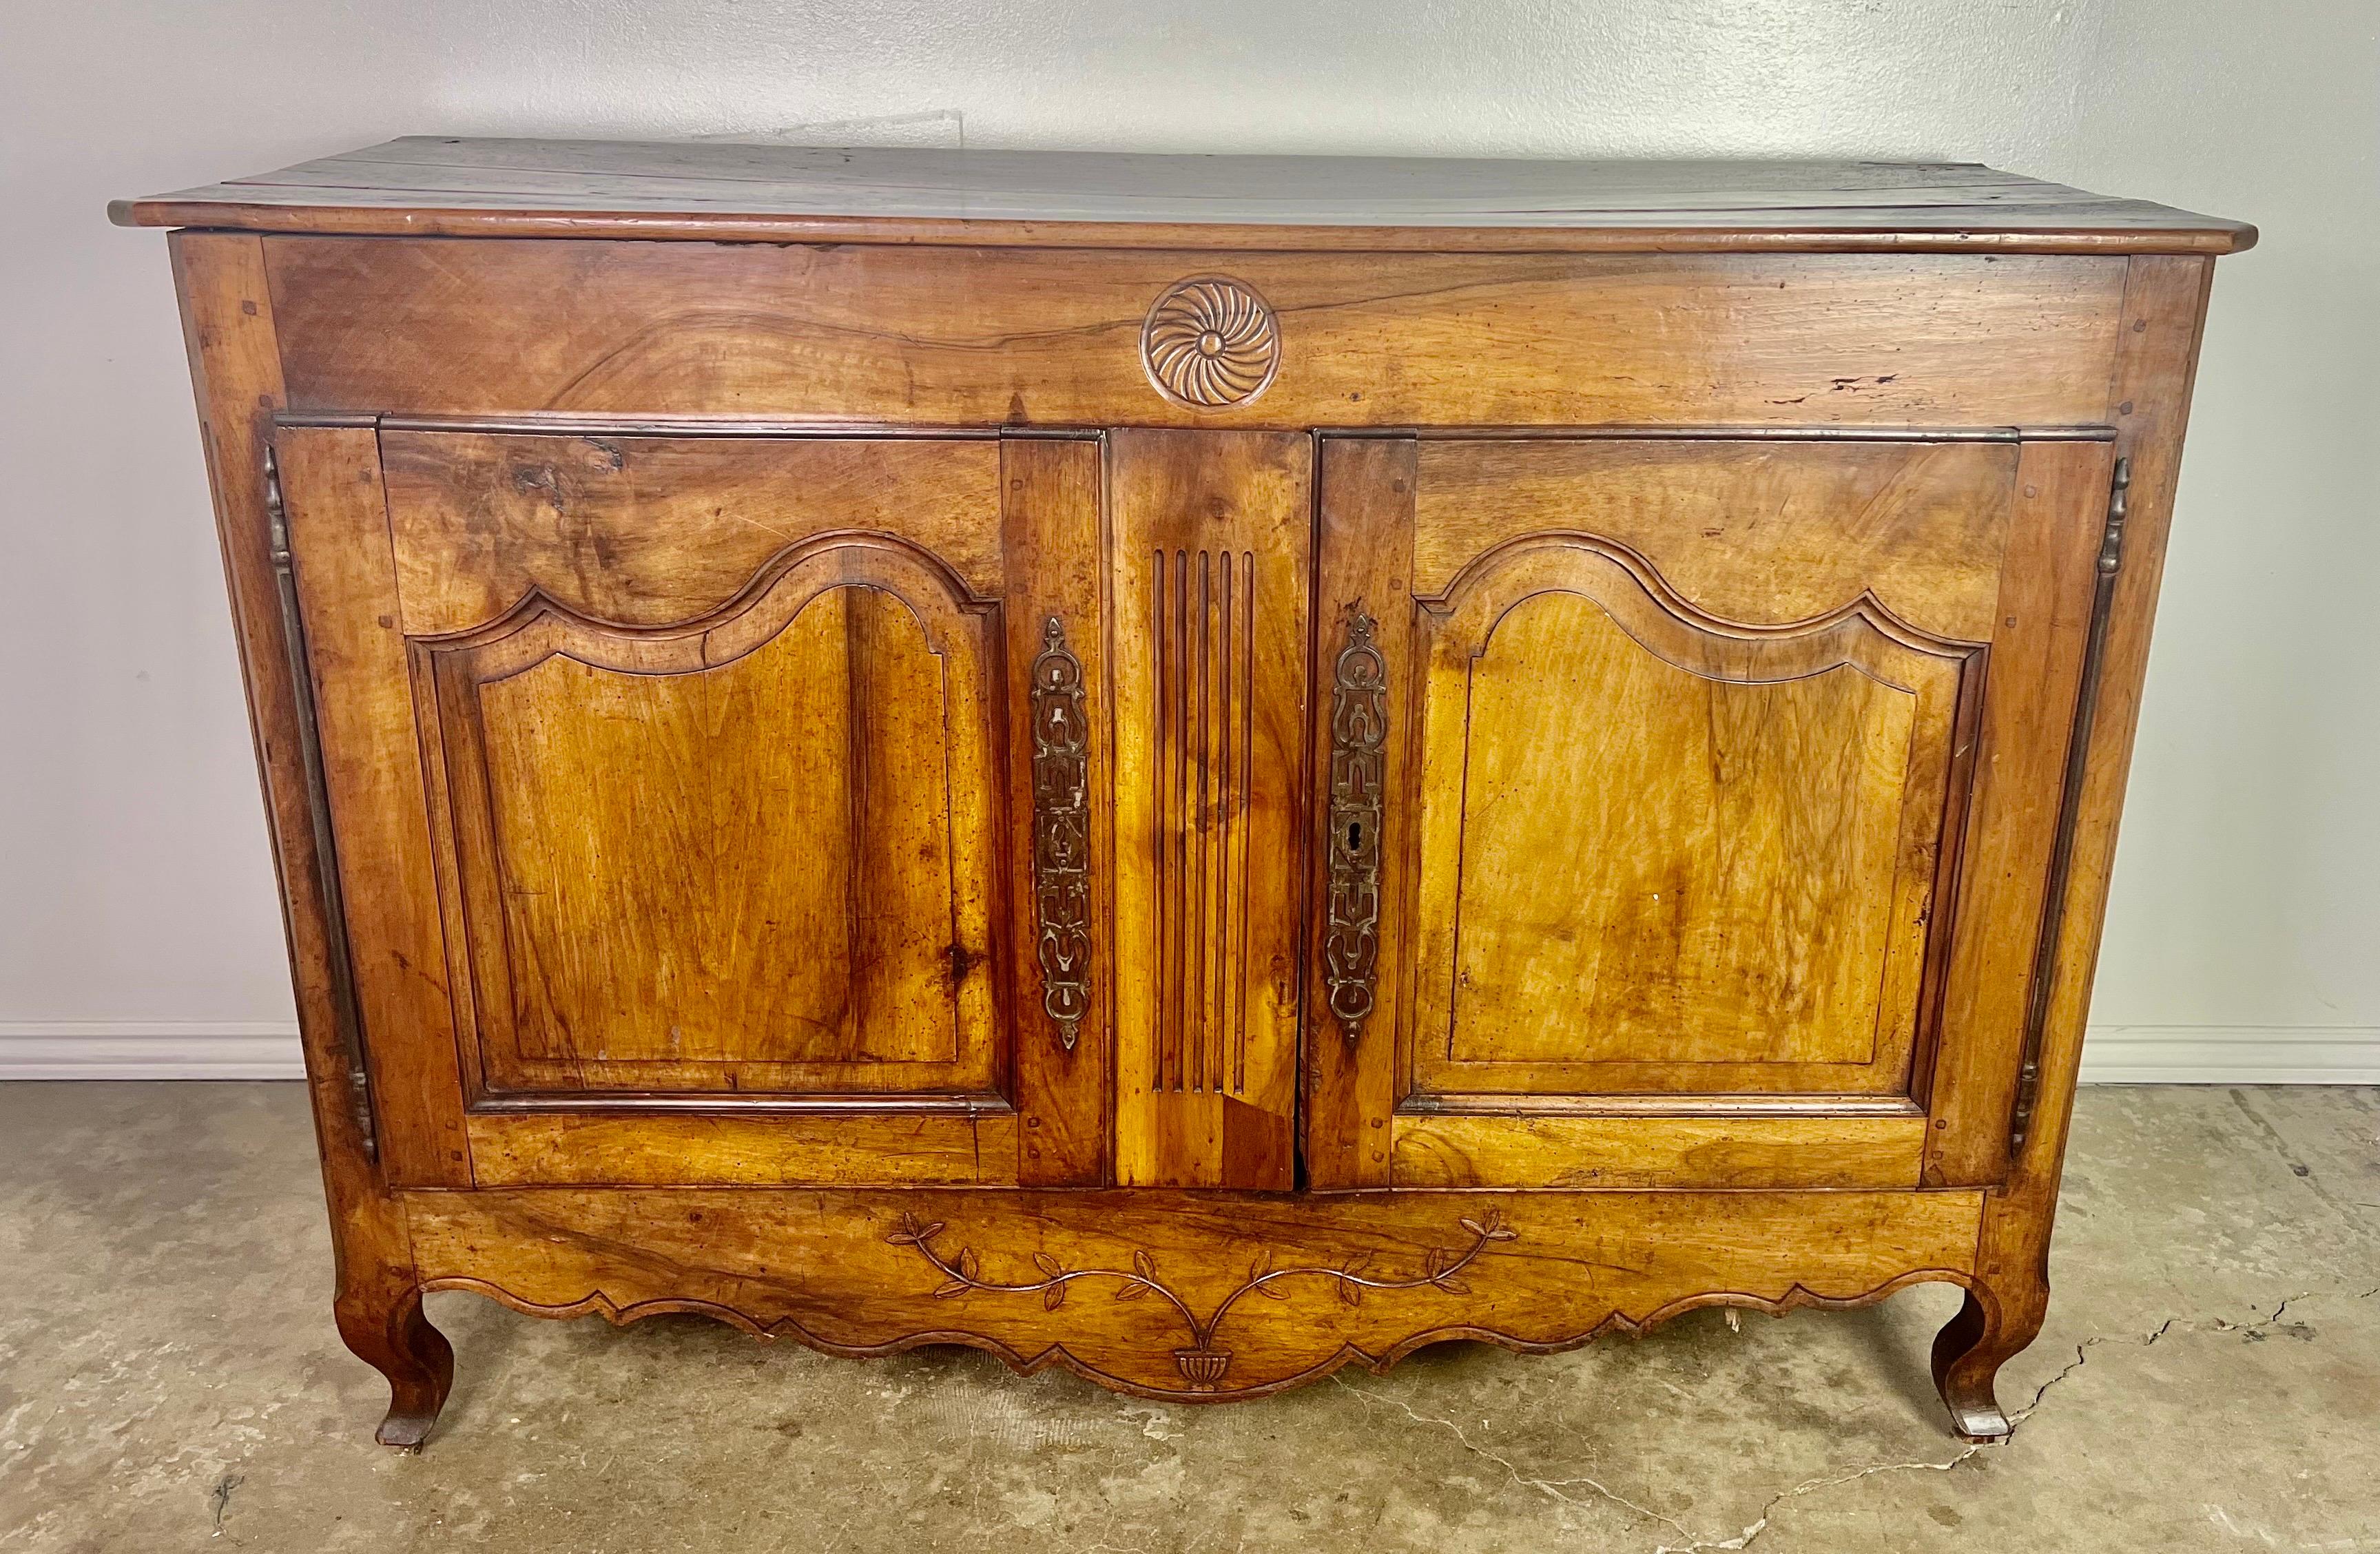 18th century French walnut buffet. The buffet has two paneled doors with original brass hardware. The body of the piece stands on four cabriole legs. The designs on both the bottom and top are simple and elegant. The walnut has developed a beautiful